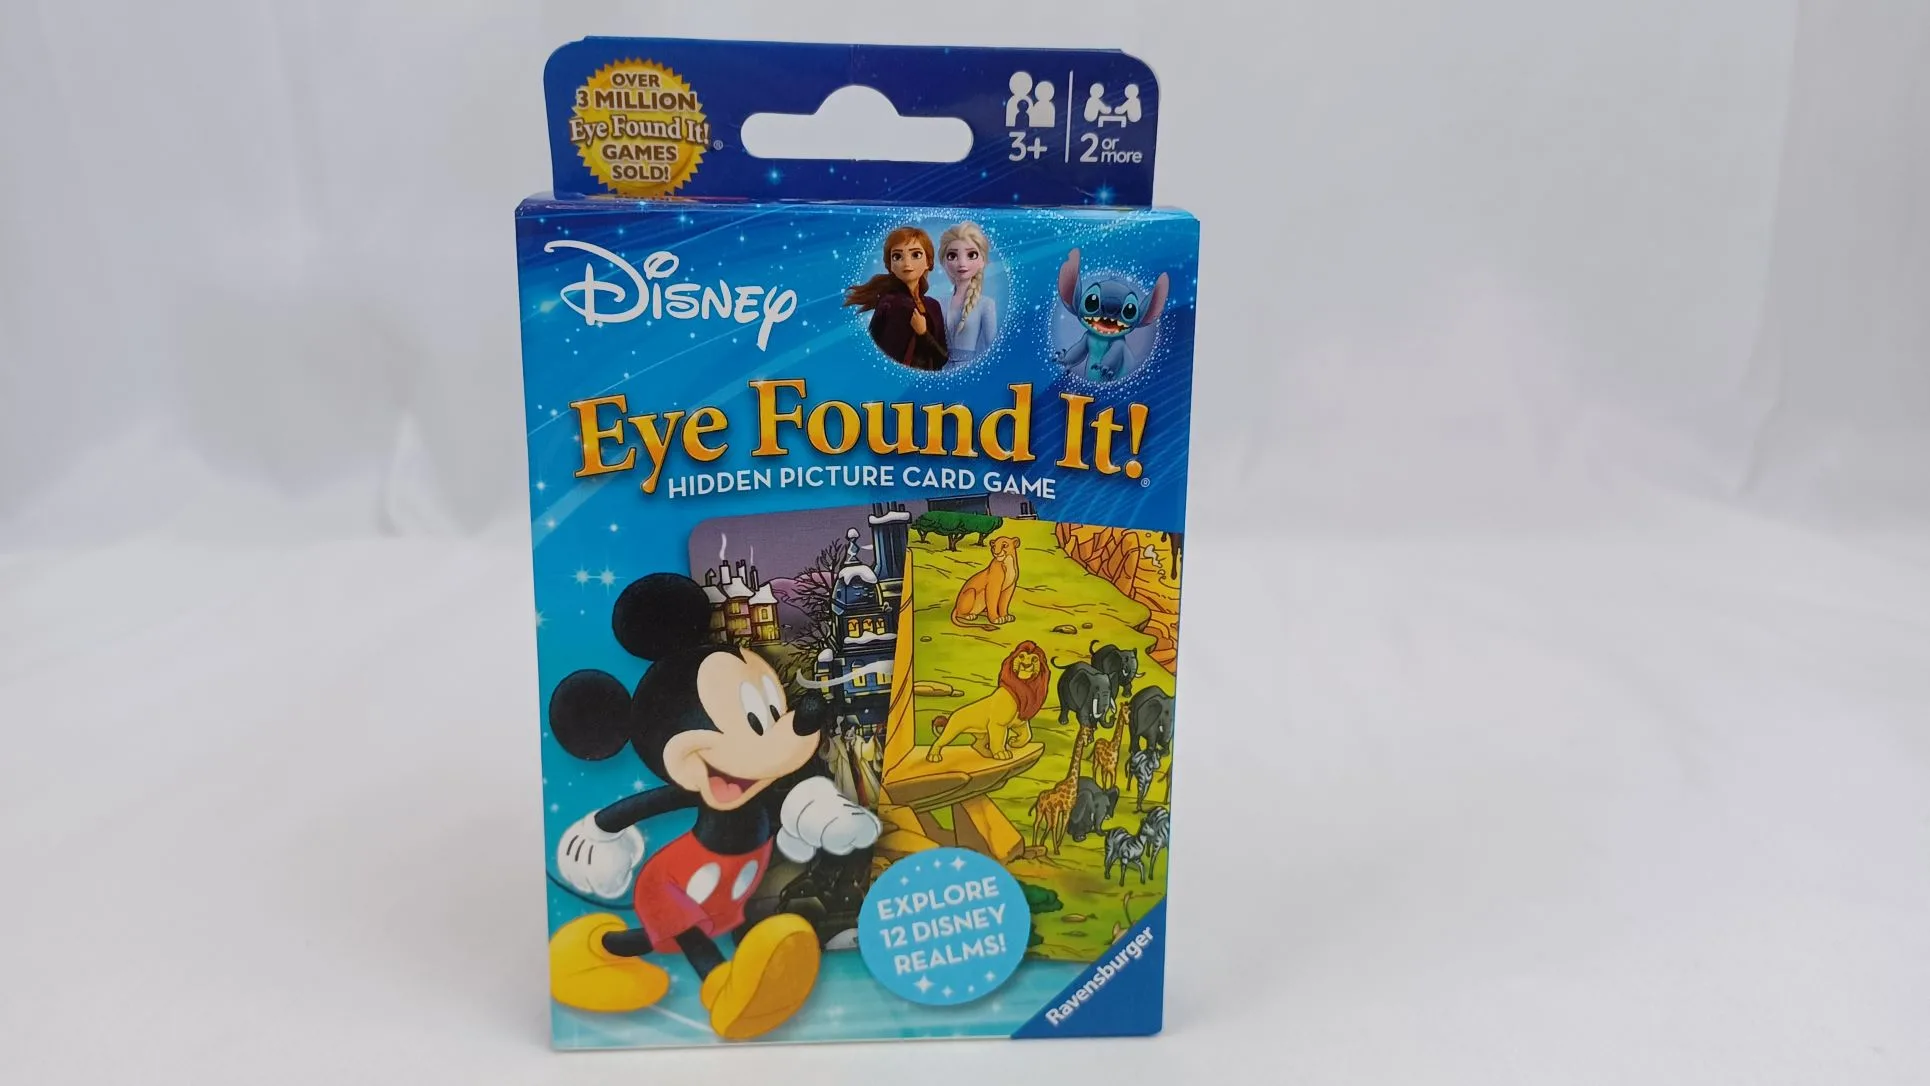 Box for Disney Eye Found It! Hidden Picture Card Game